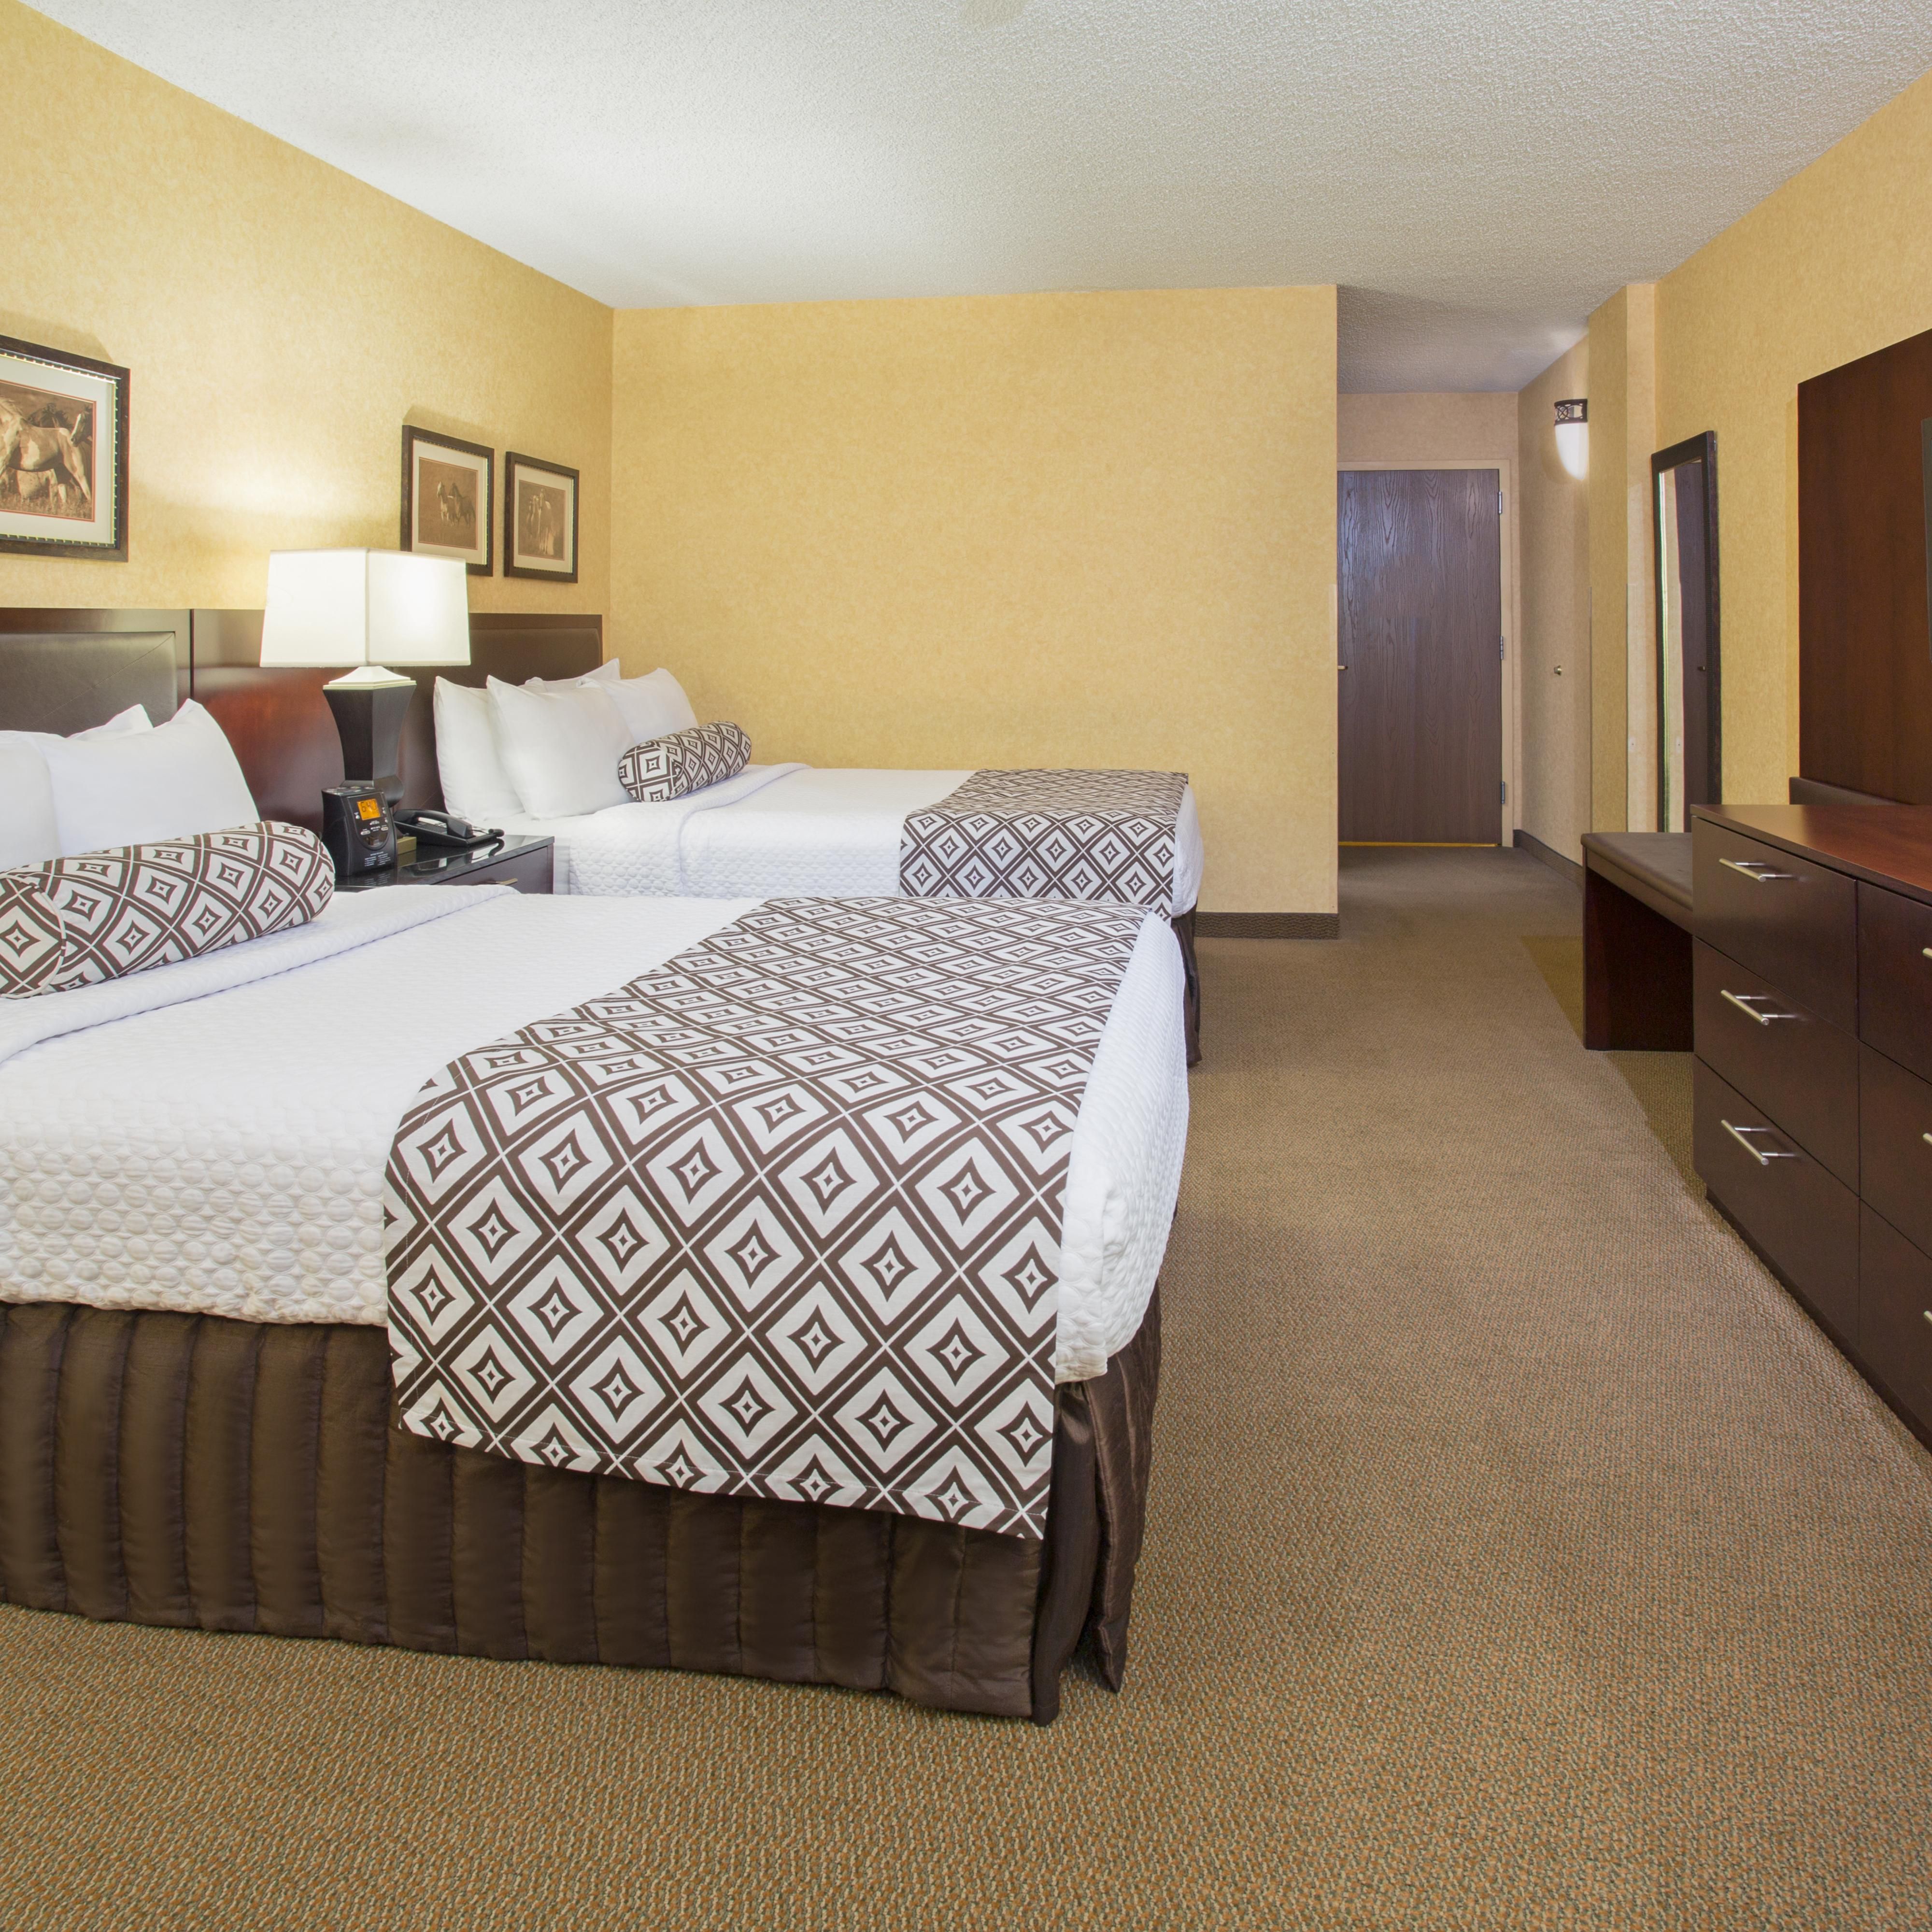 Indulge yourself in our warm, welcoming Double Bed Rooms